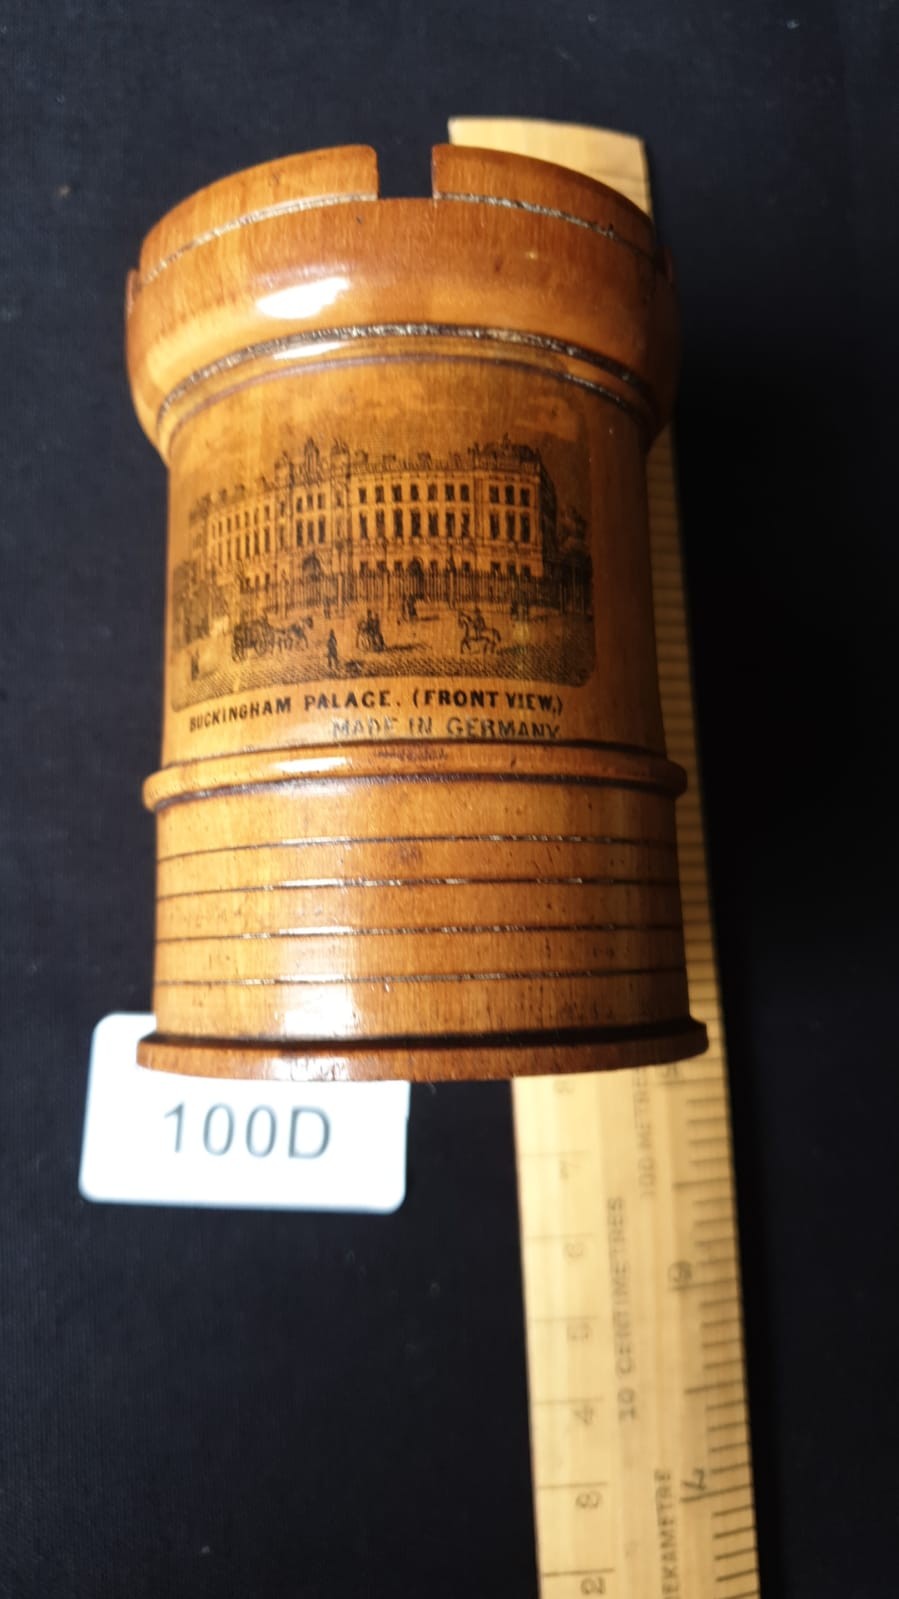 Rare Mauchline ware pen / pencil holder buckingham palace front view. - Image 2 of 2